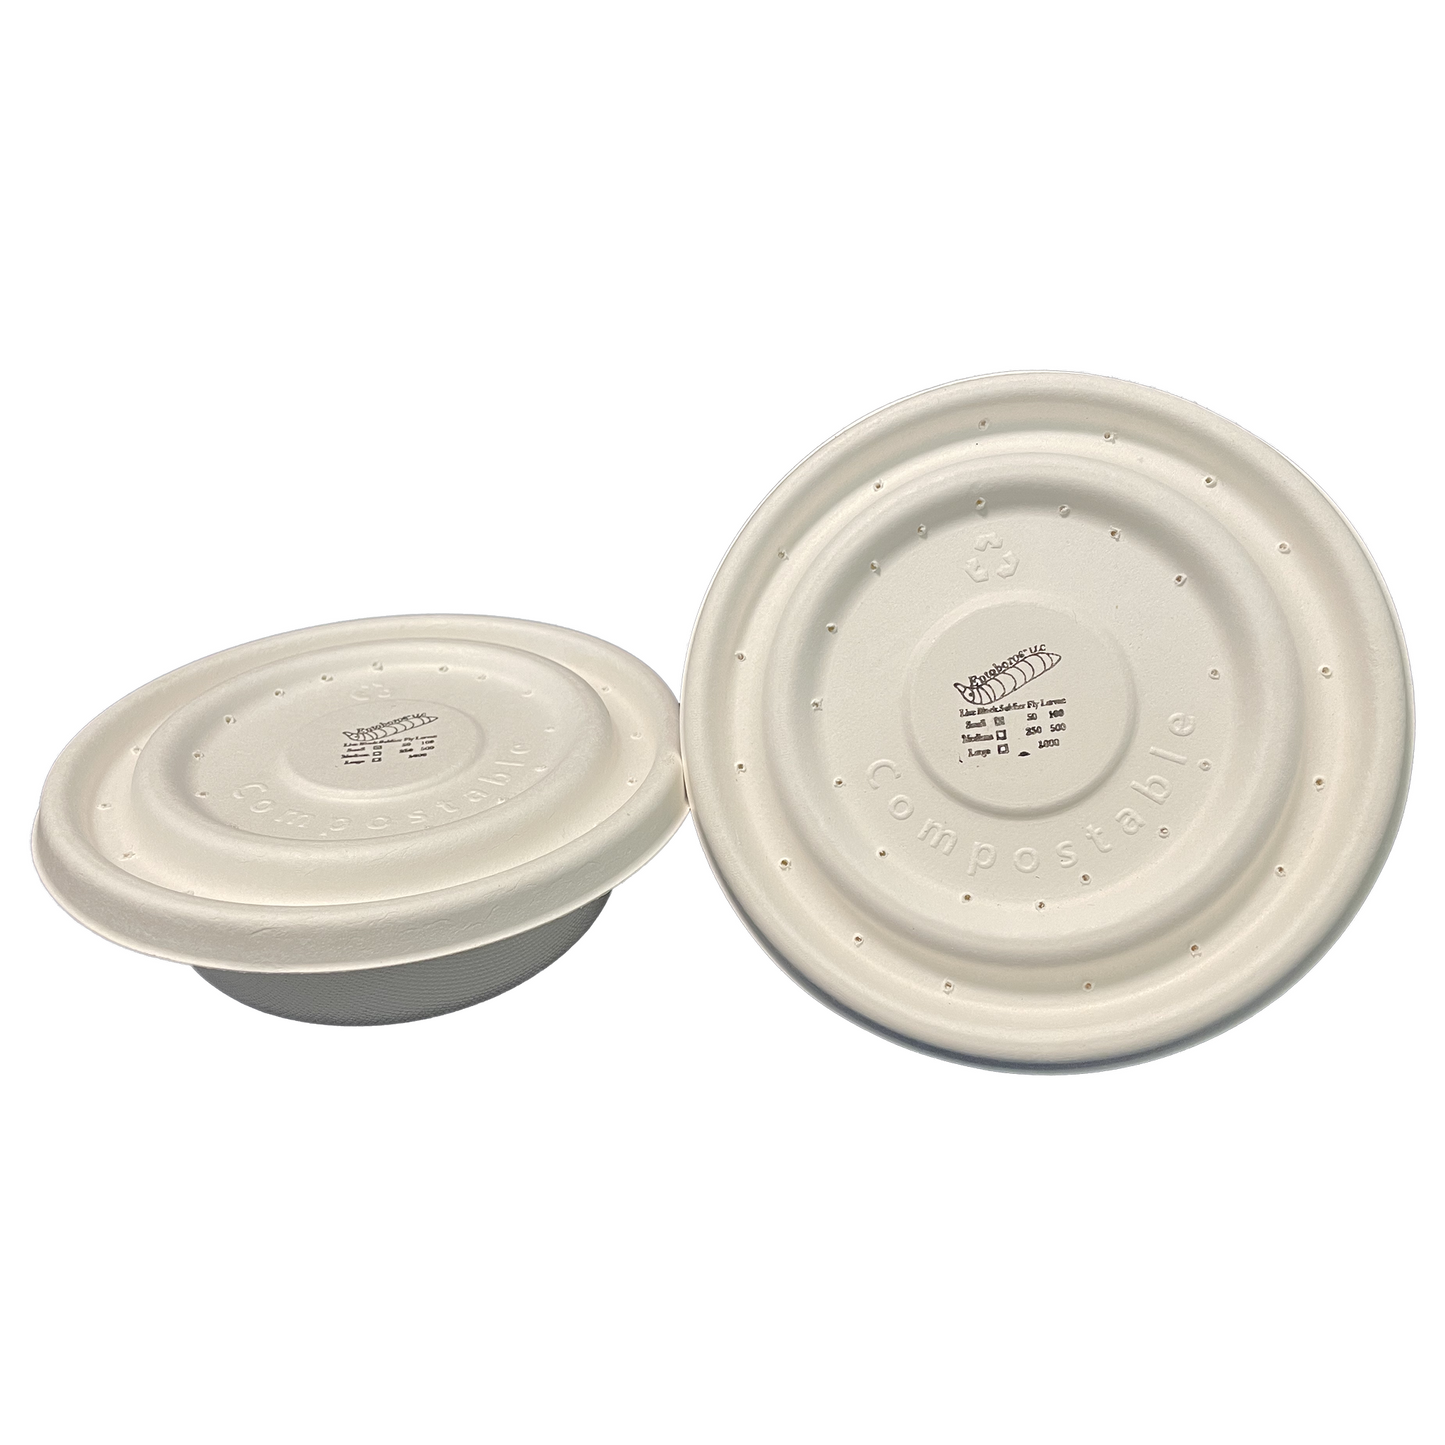 circular compostable packaging with stamp of Entoboros logo on the lid.